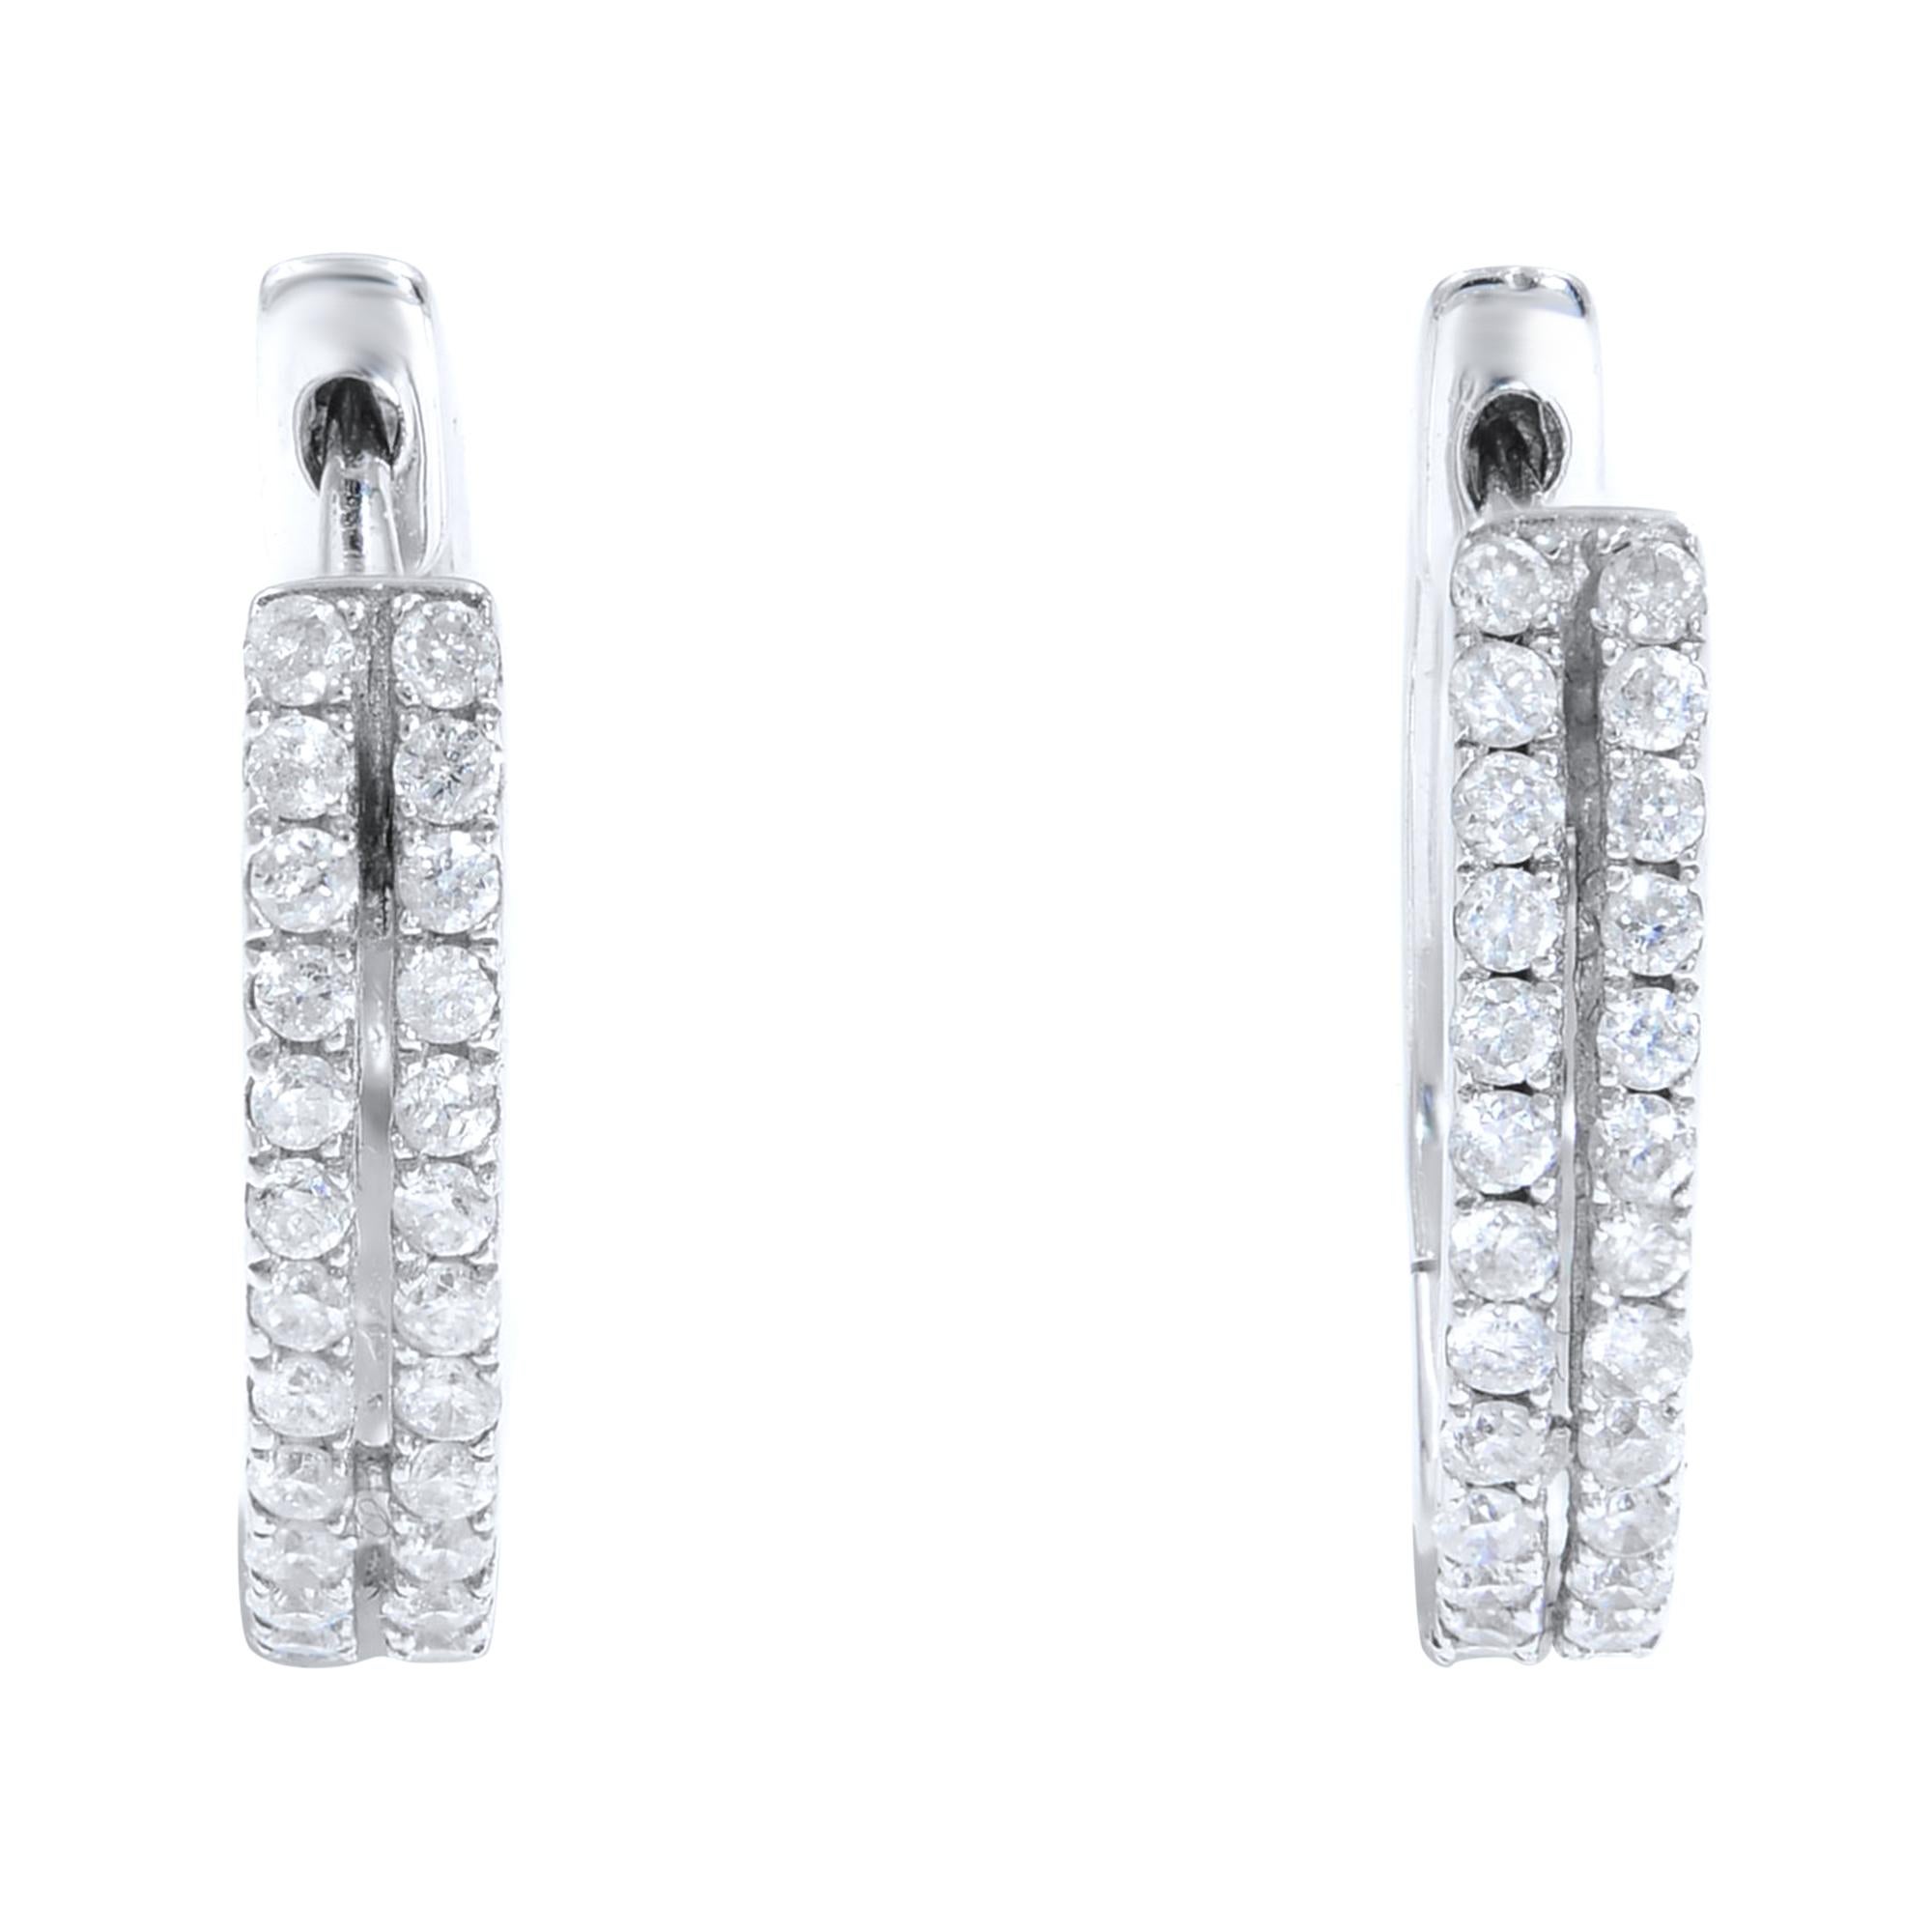 Beautiful huggie earrings perfect for every day!
14K White Gold
0.15cts in round diamonds
No paperwork offered
Warranty from our store
Measurements: 8mm long
